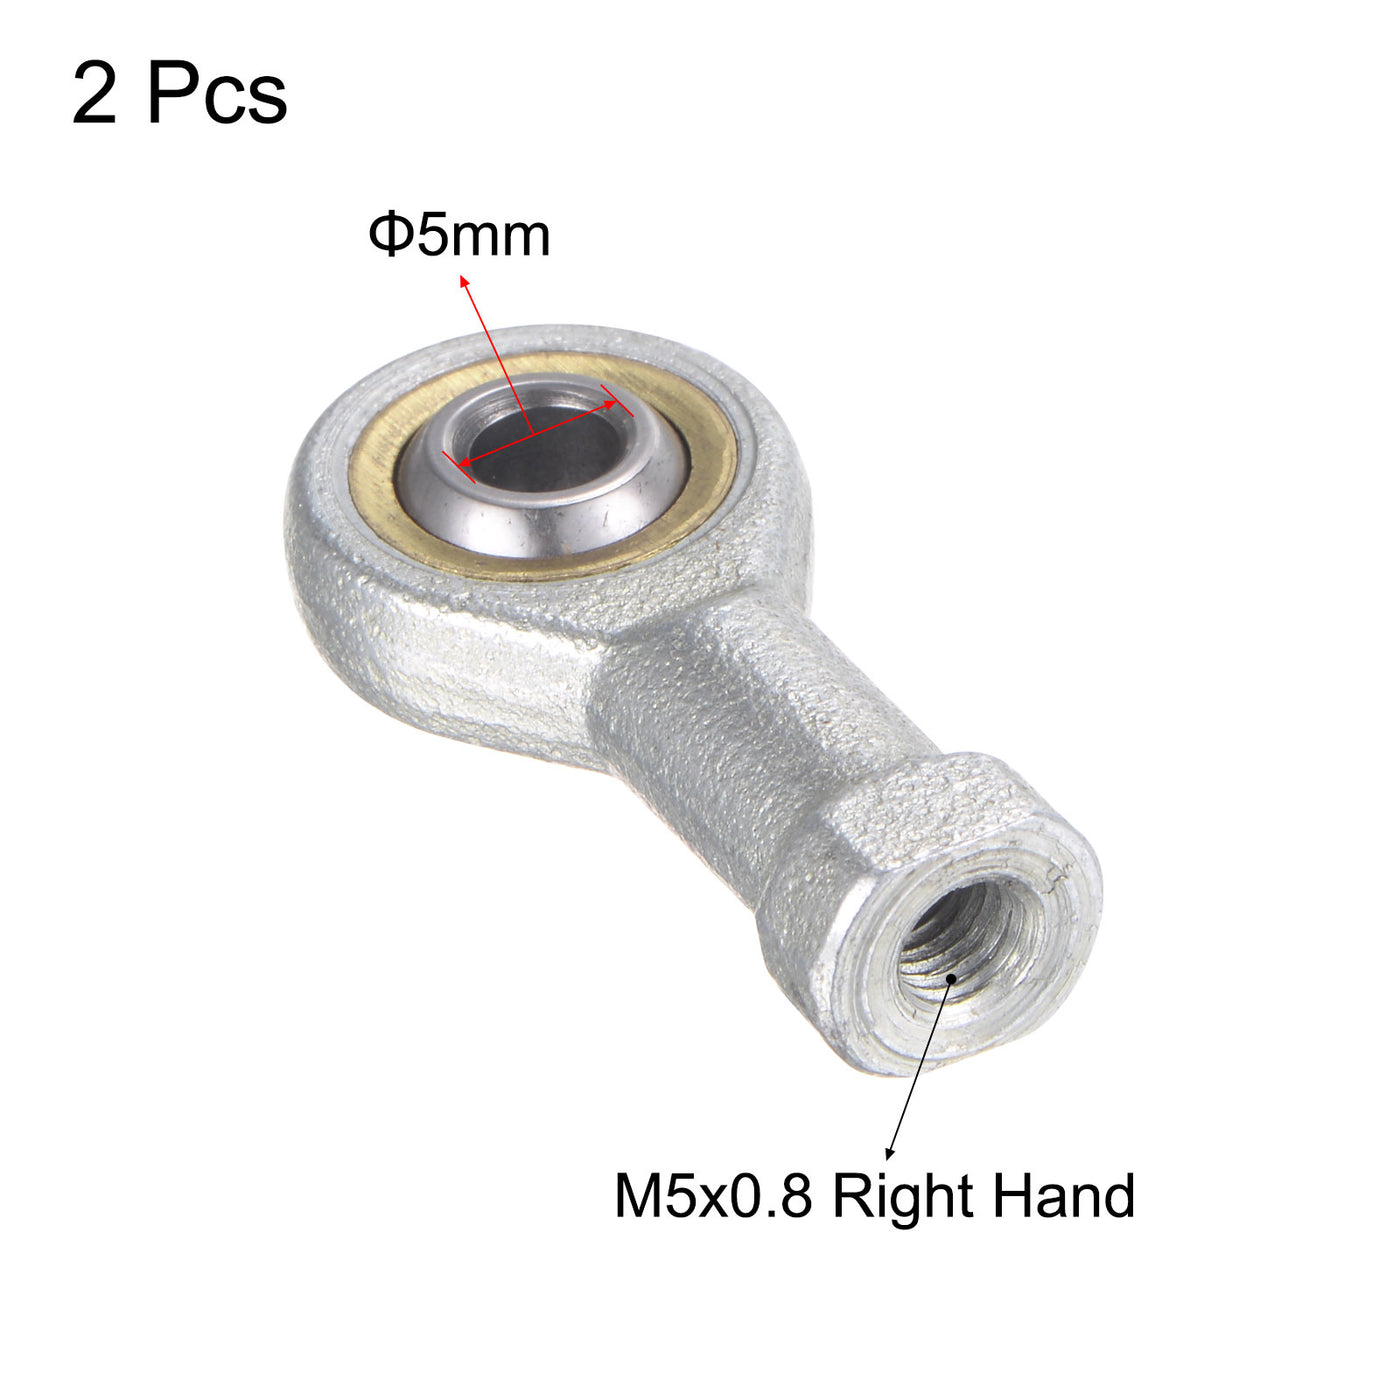 uxcell Uxcell 2pcs SI5TK PHSA5 Rod End Bearing 5mm Bore M5x0.8 Right Hand Female Thread